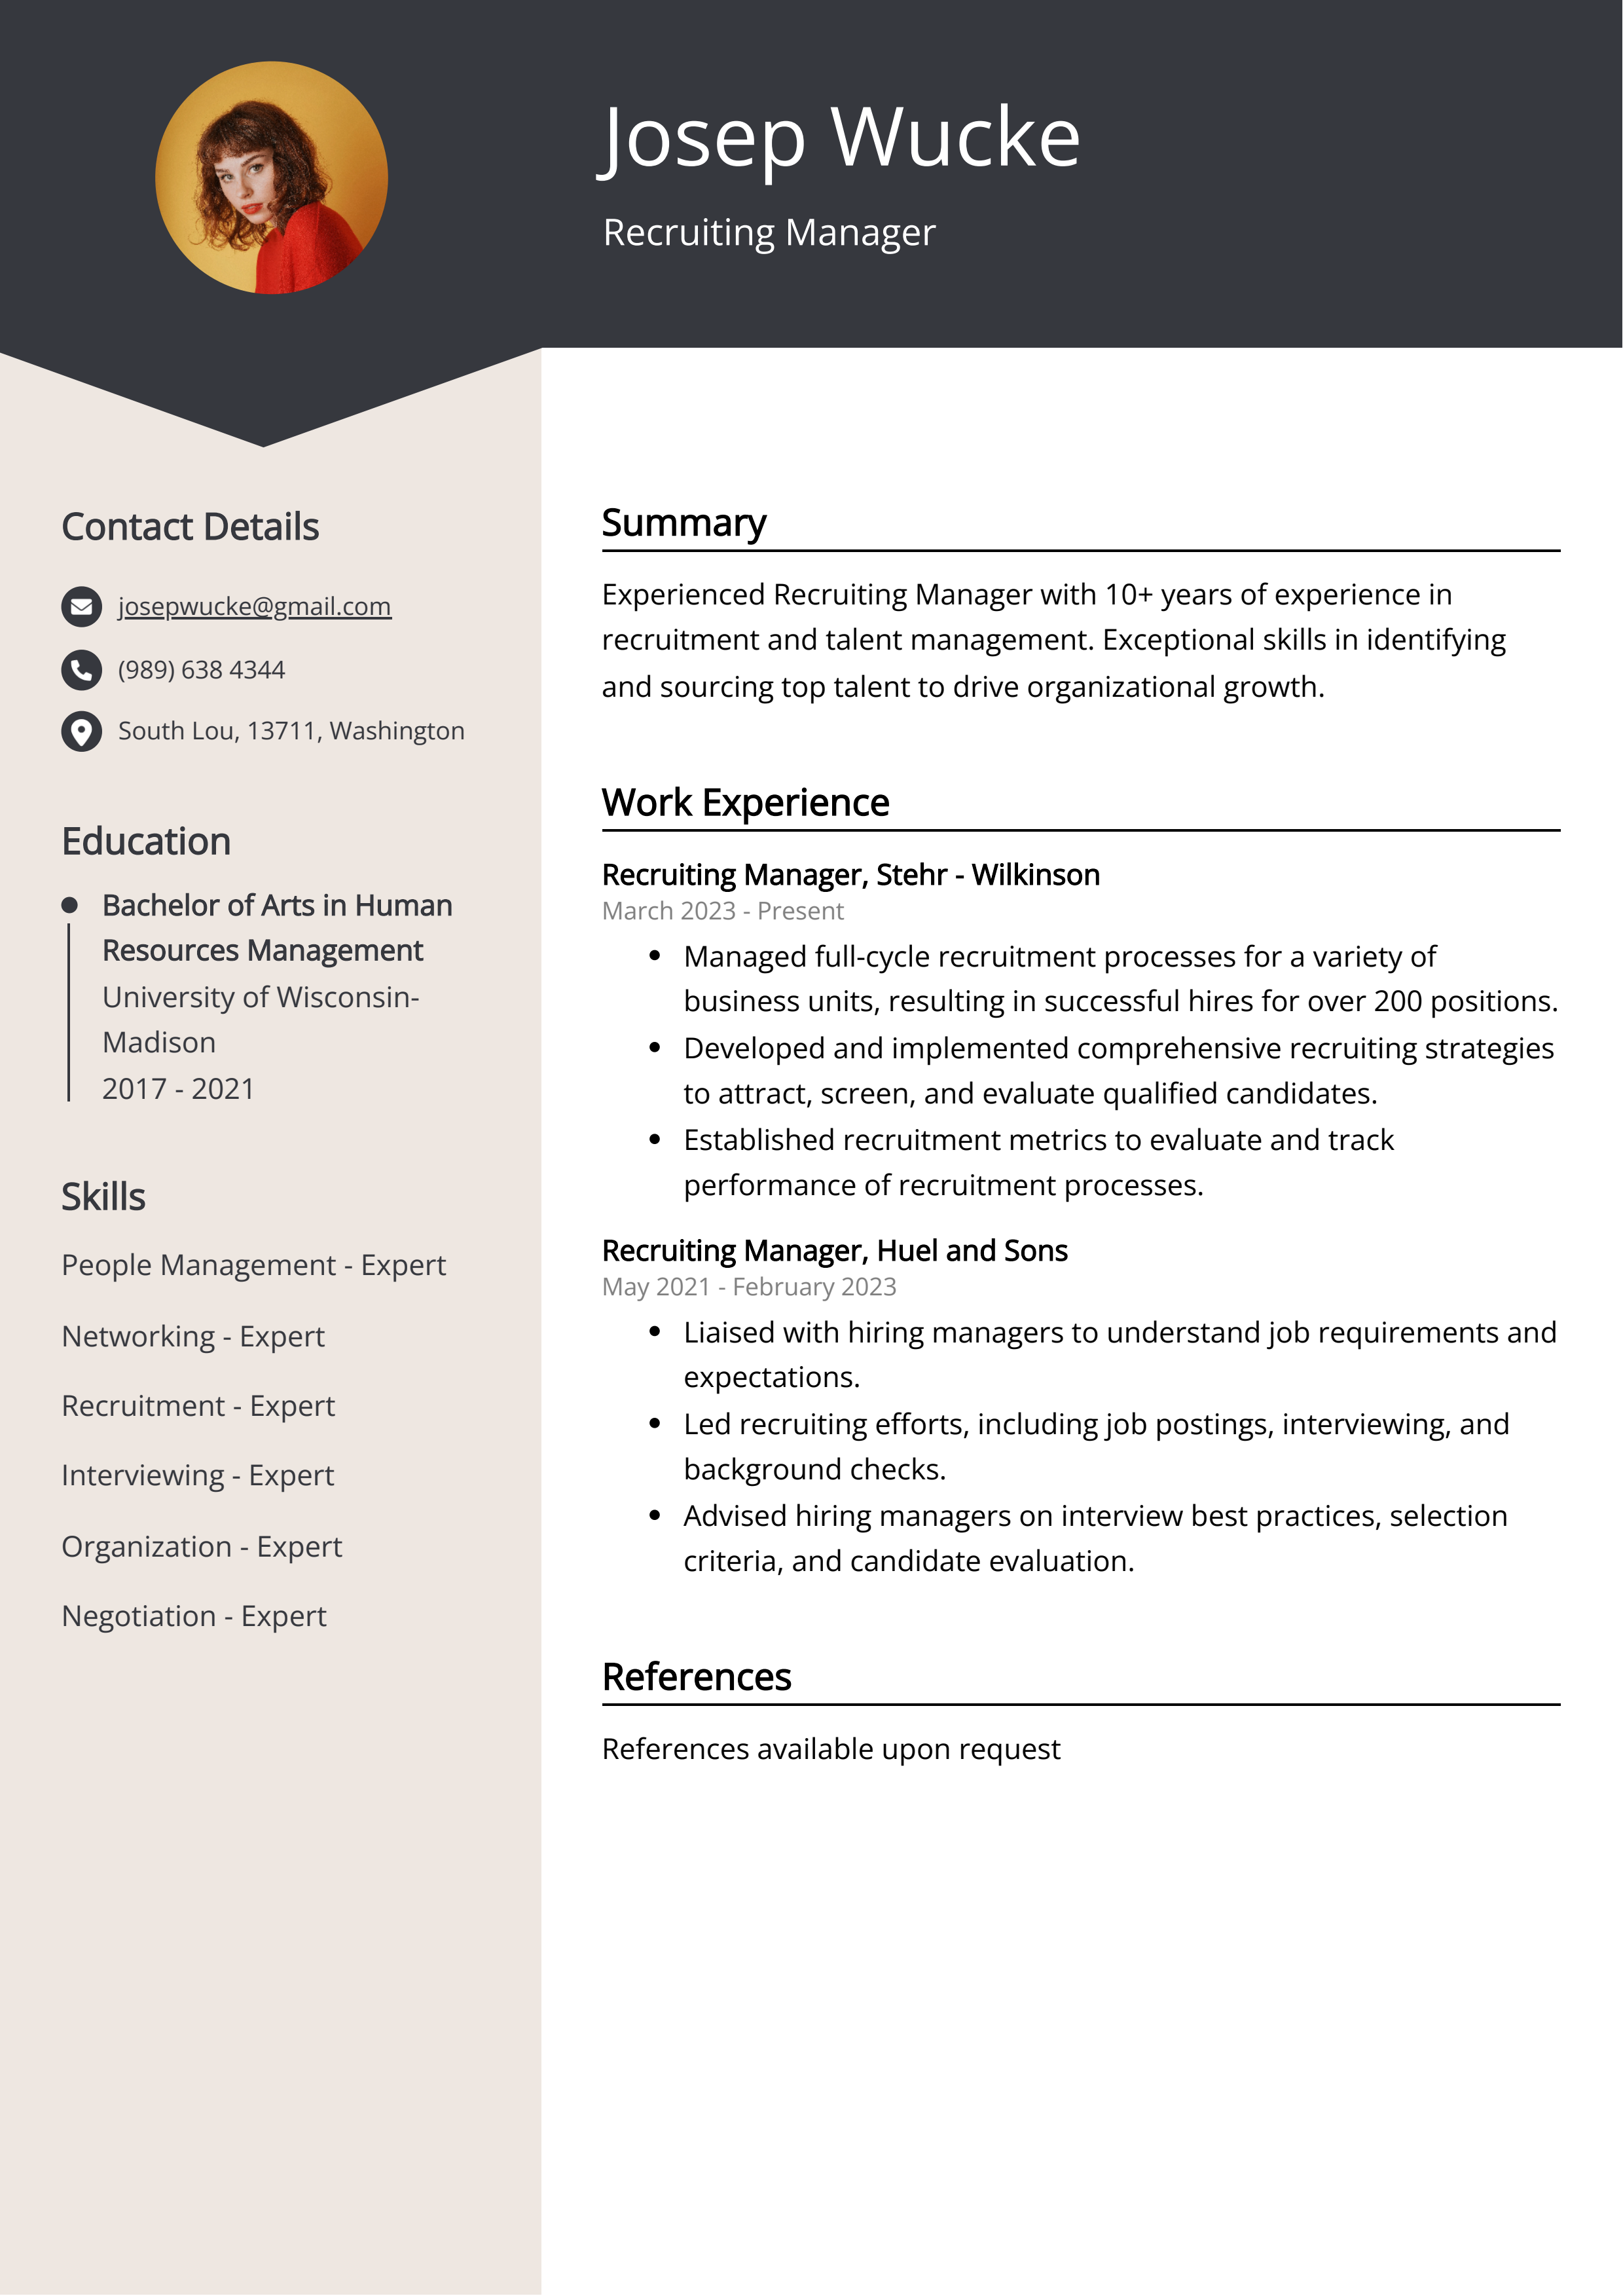 Recruiting Manager CV Example